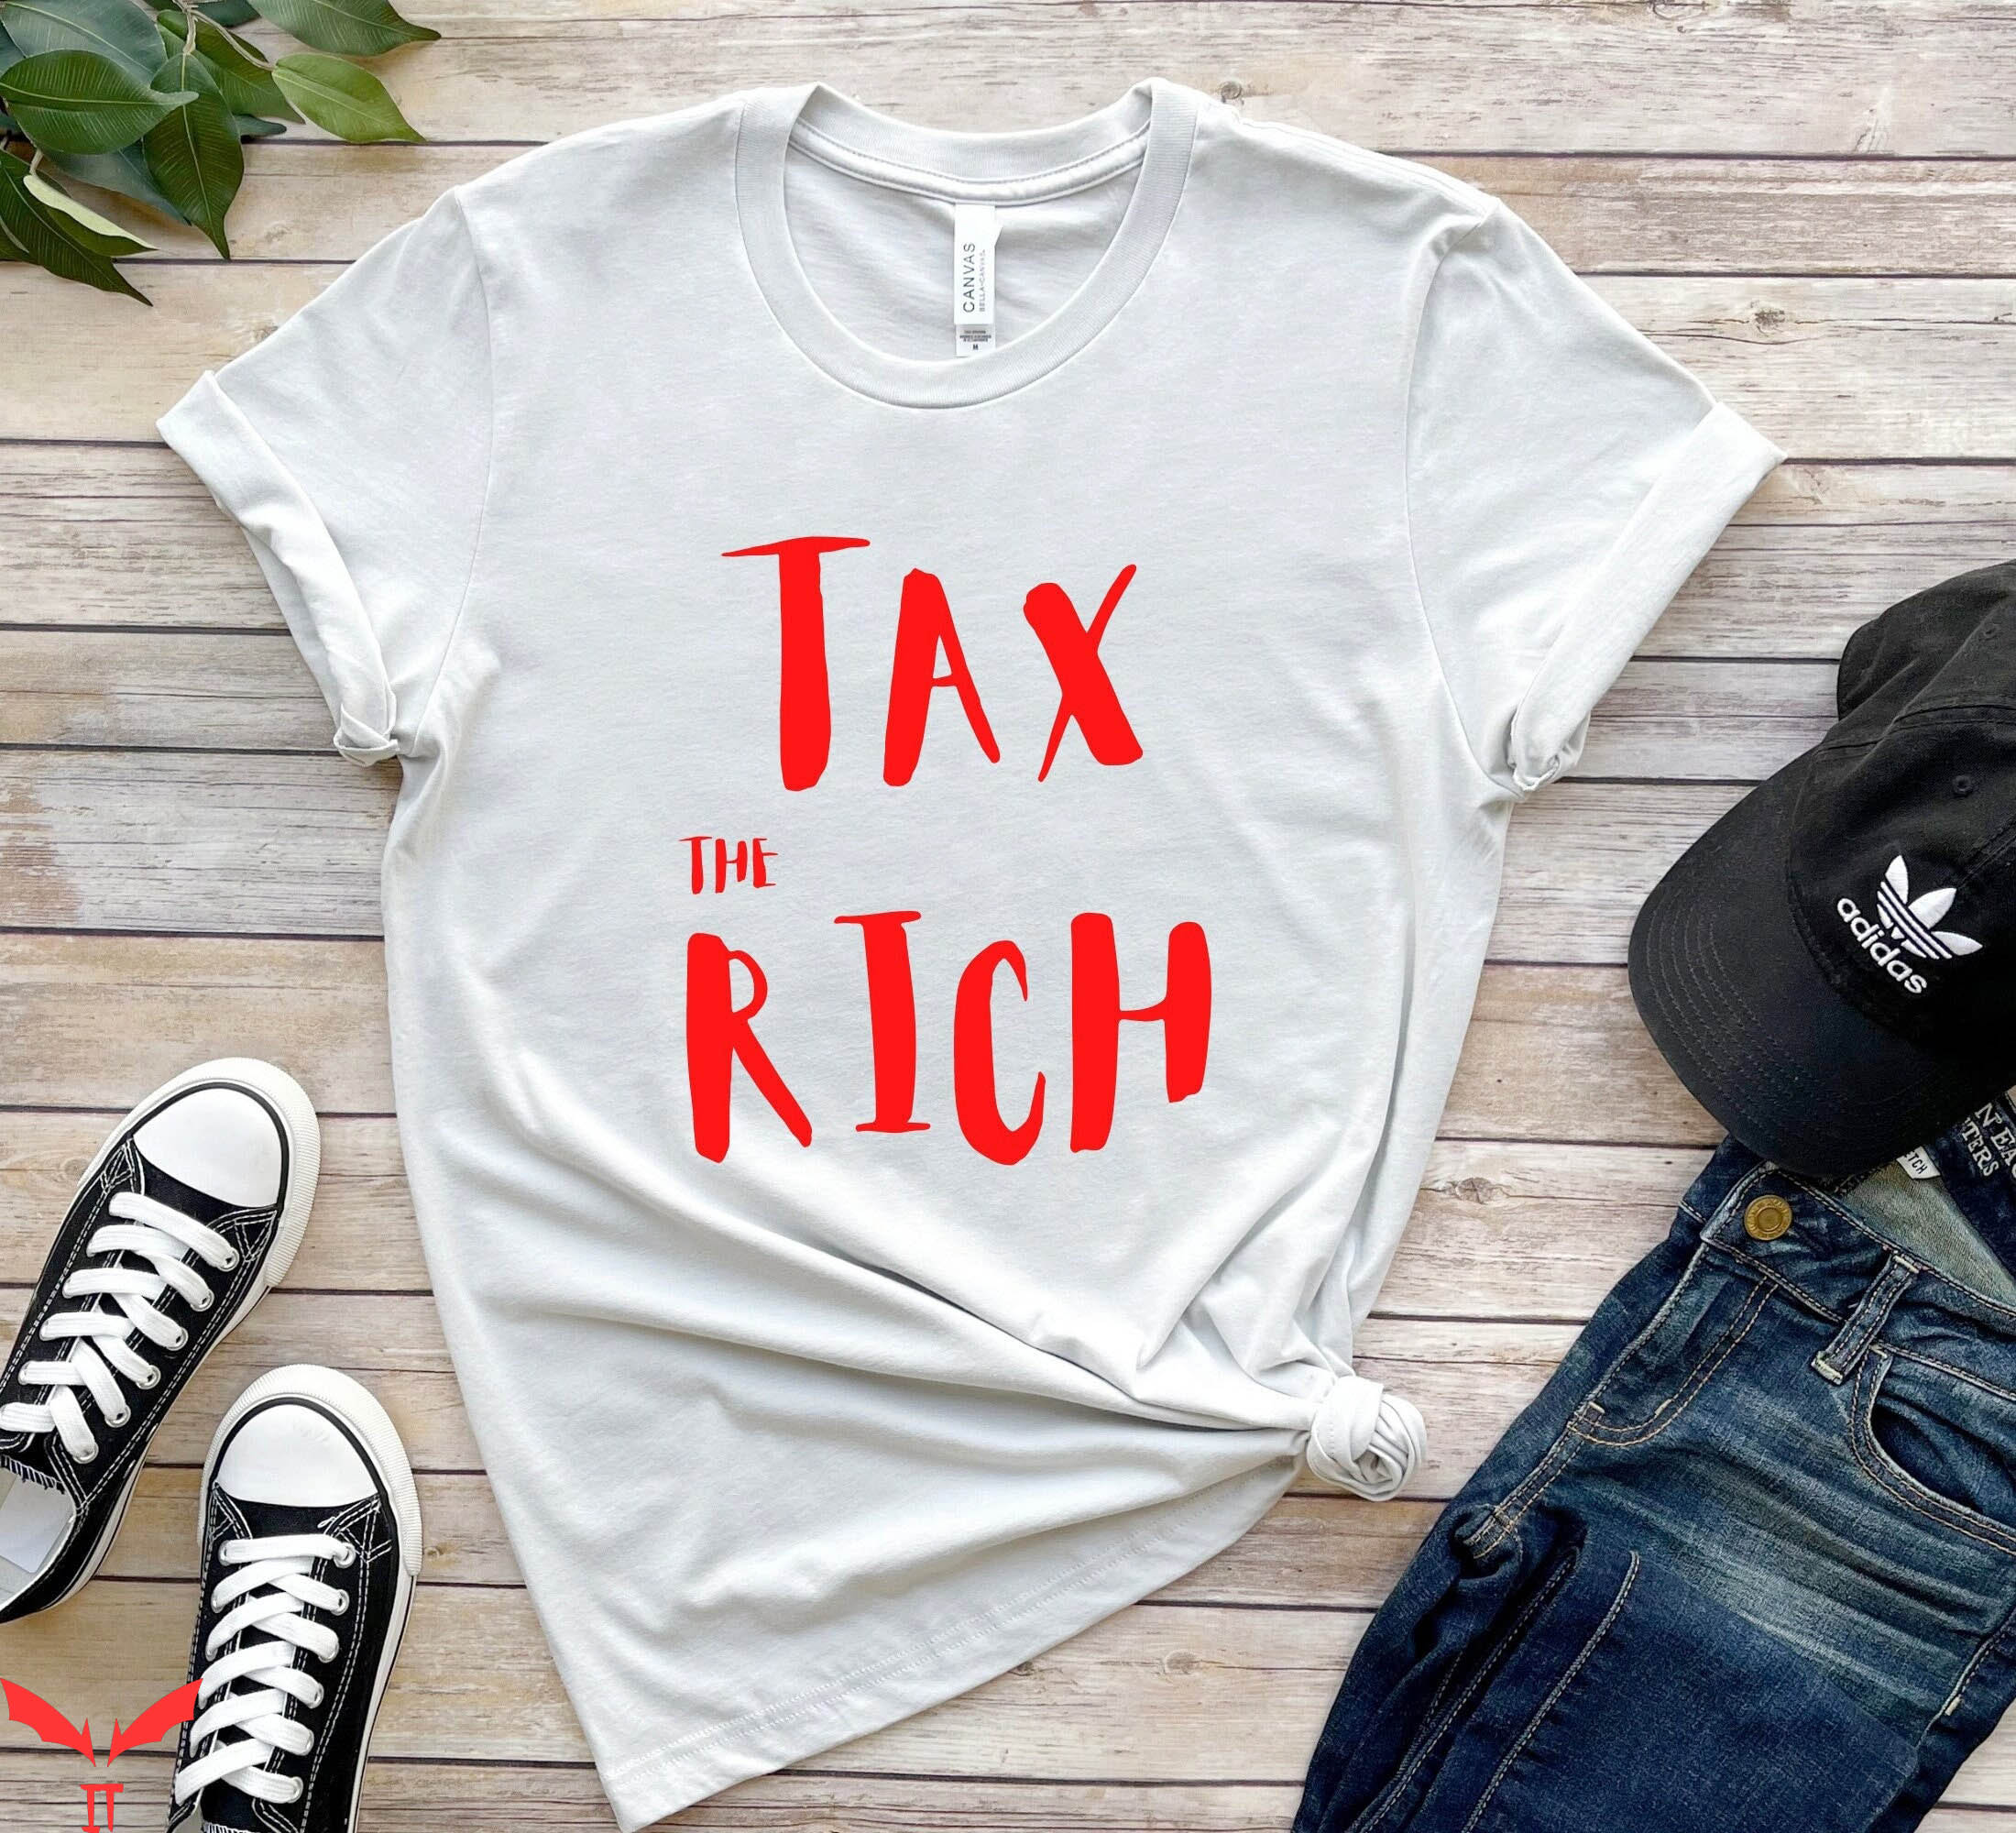 Make The Rich Pay T-Shirt Space Graphic Funny Style T-Shirt